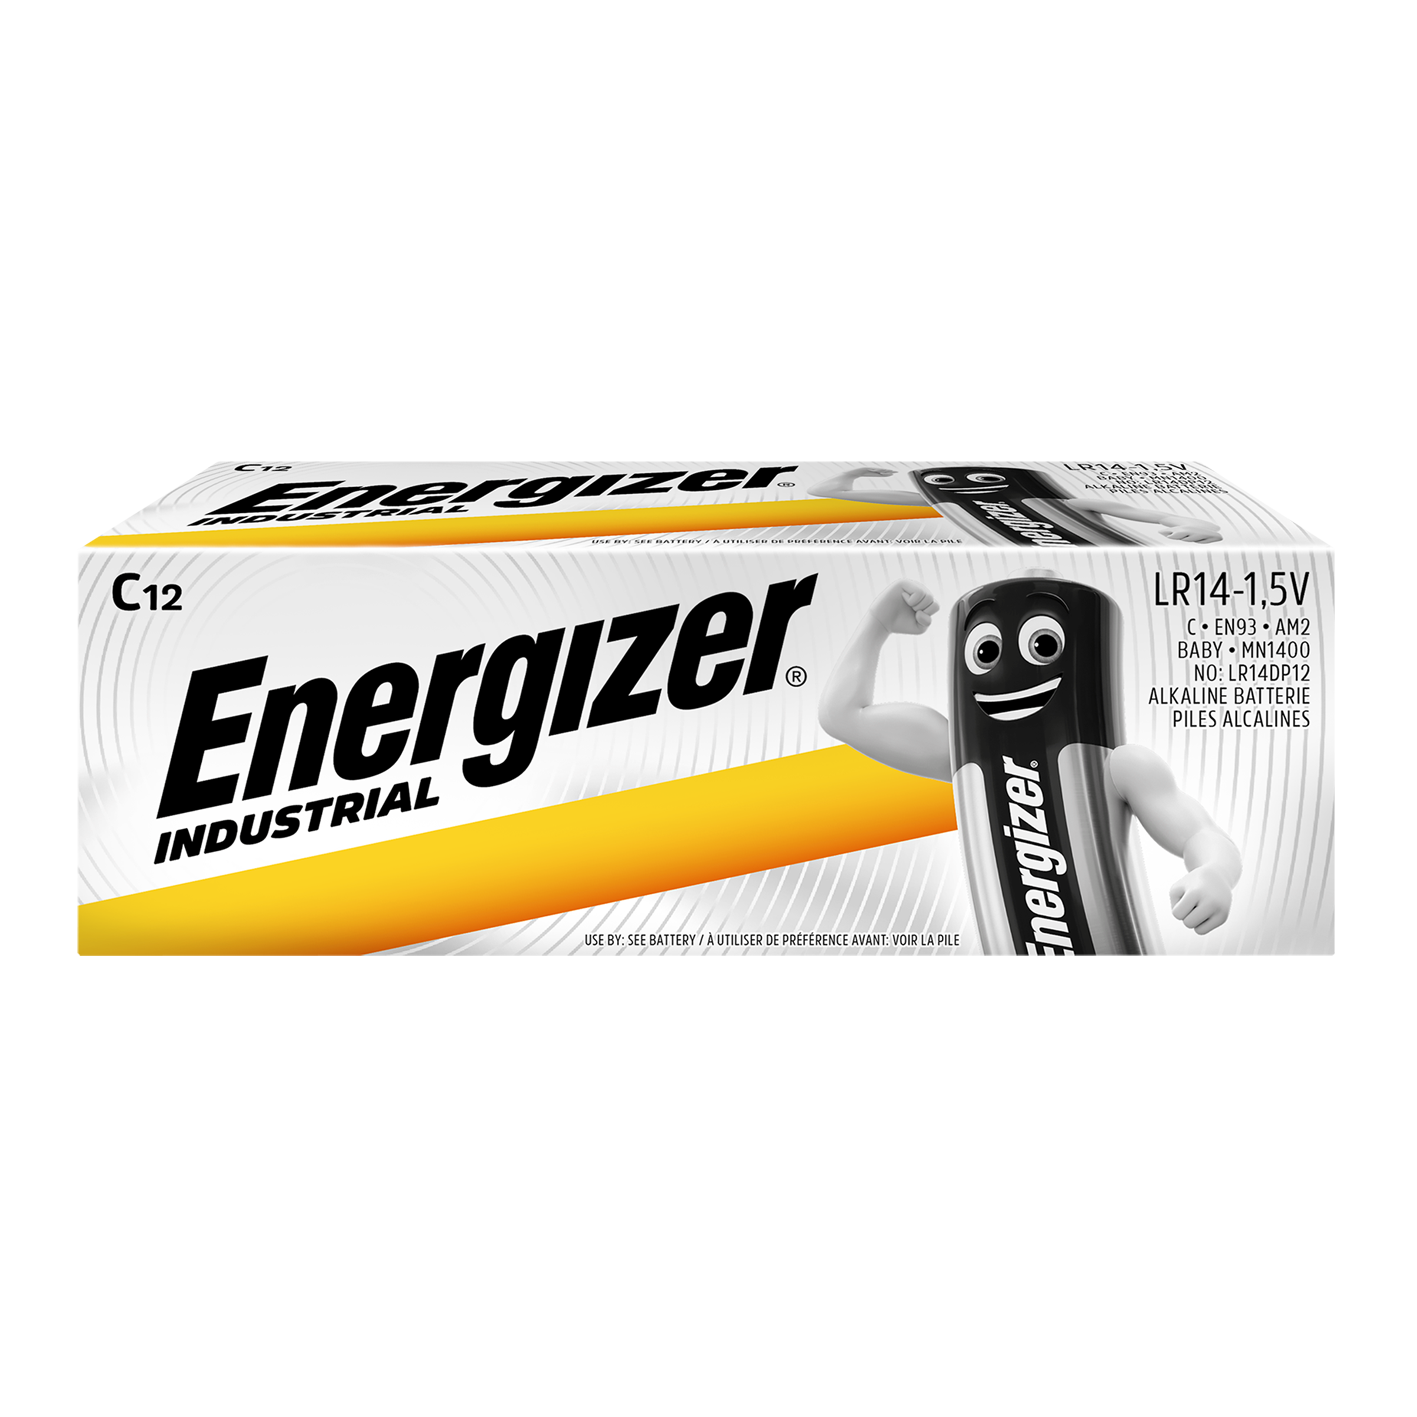 Energizer C Size Industrial, Pack of 12